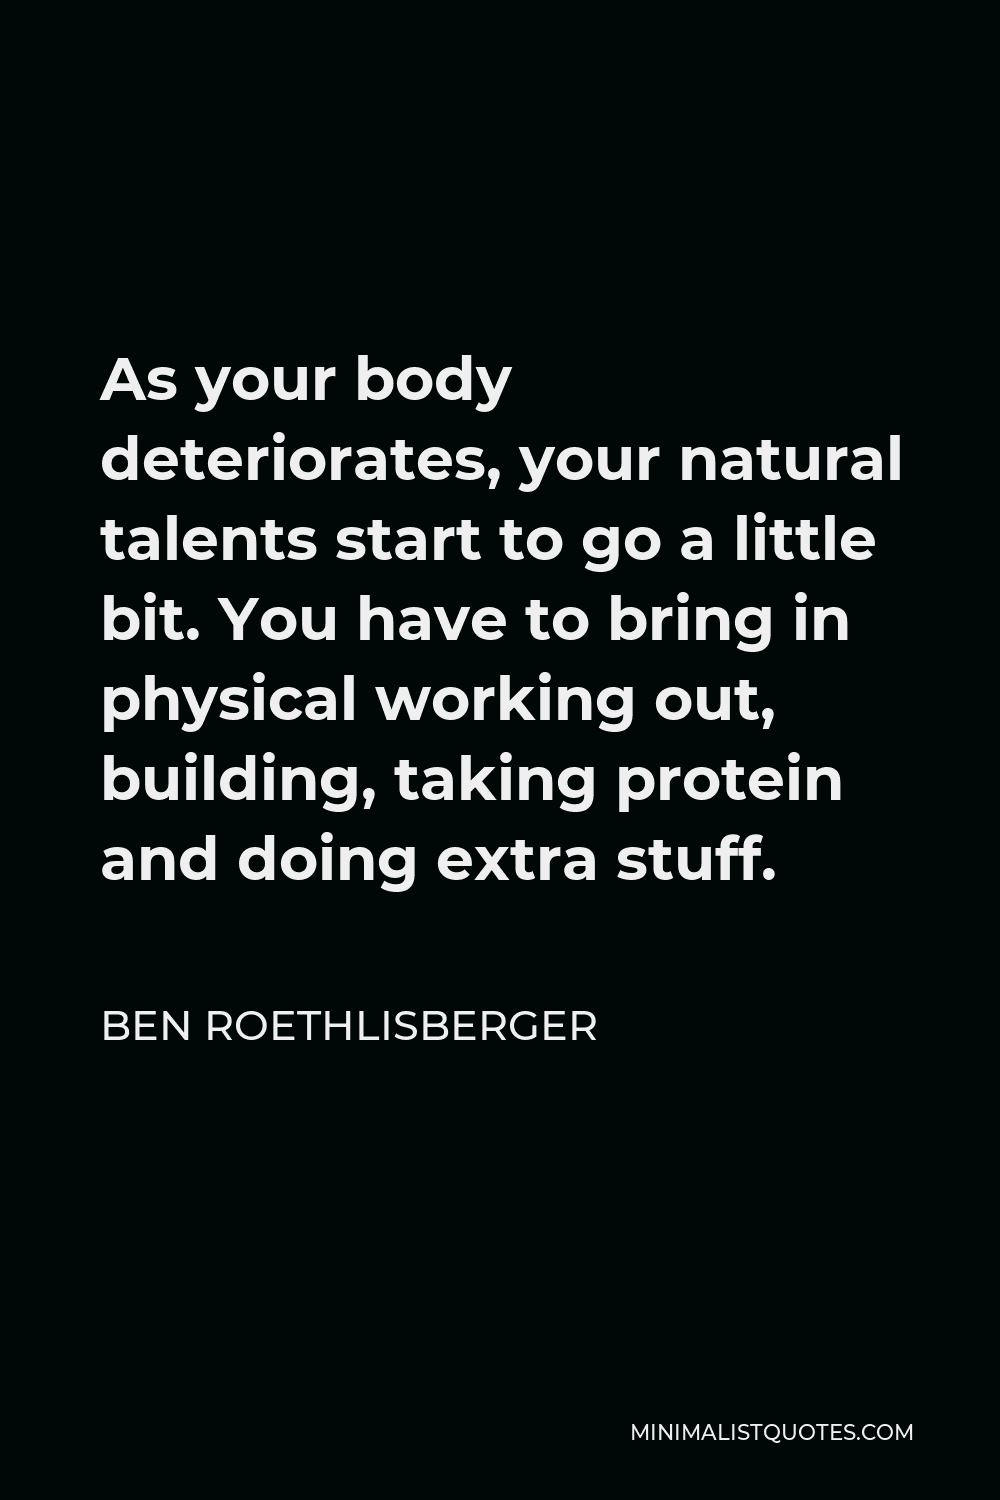 Ben Roethlisberger Quote - As your body deteriorates, your natural talents start to go a little bit. You have to bring in physical working out, building, taking protein and doing extra stuff.